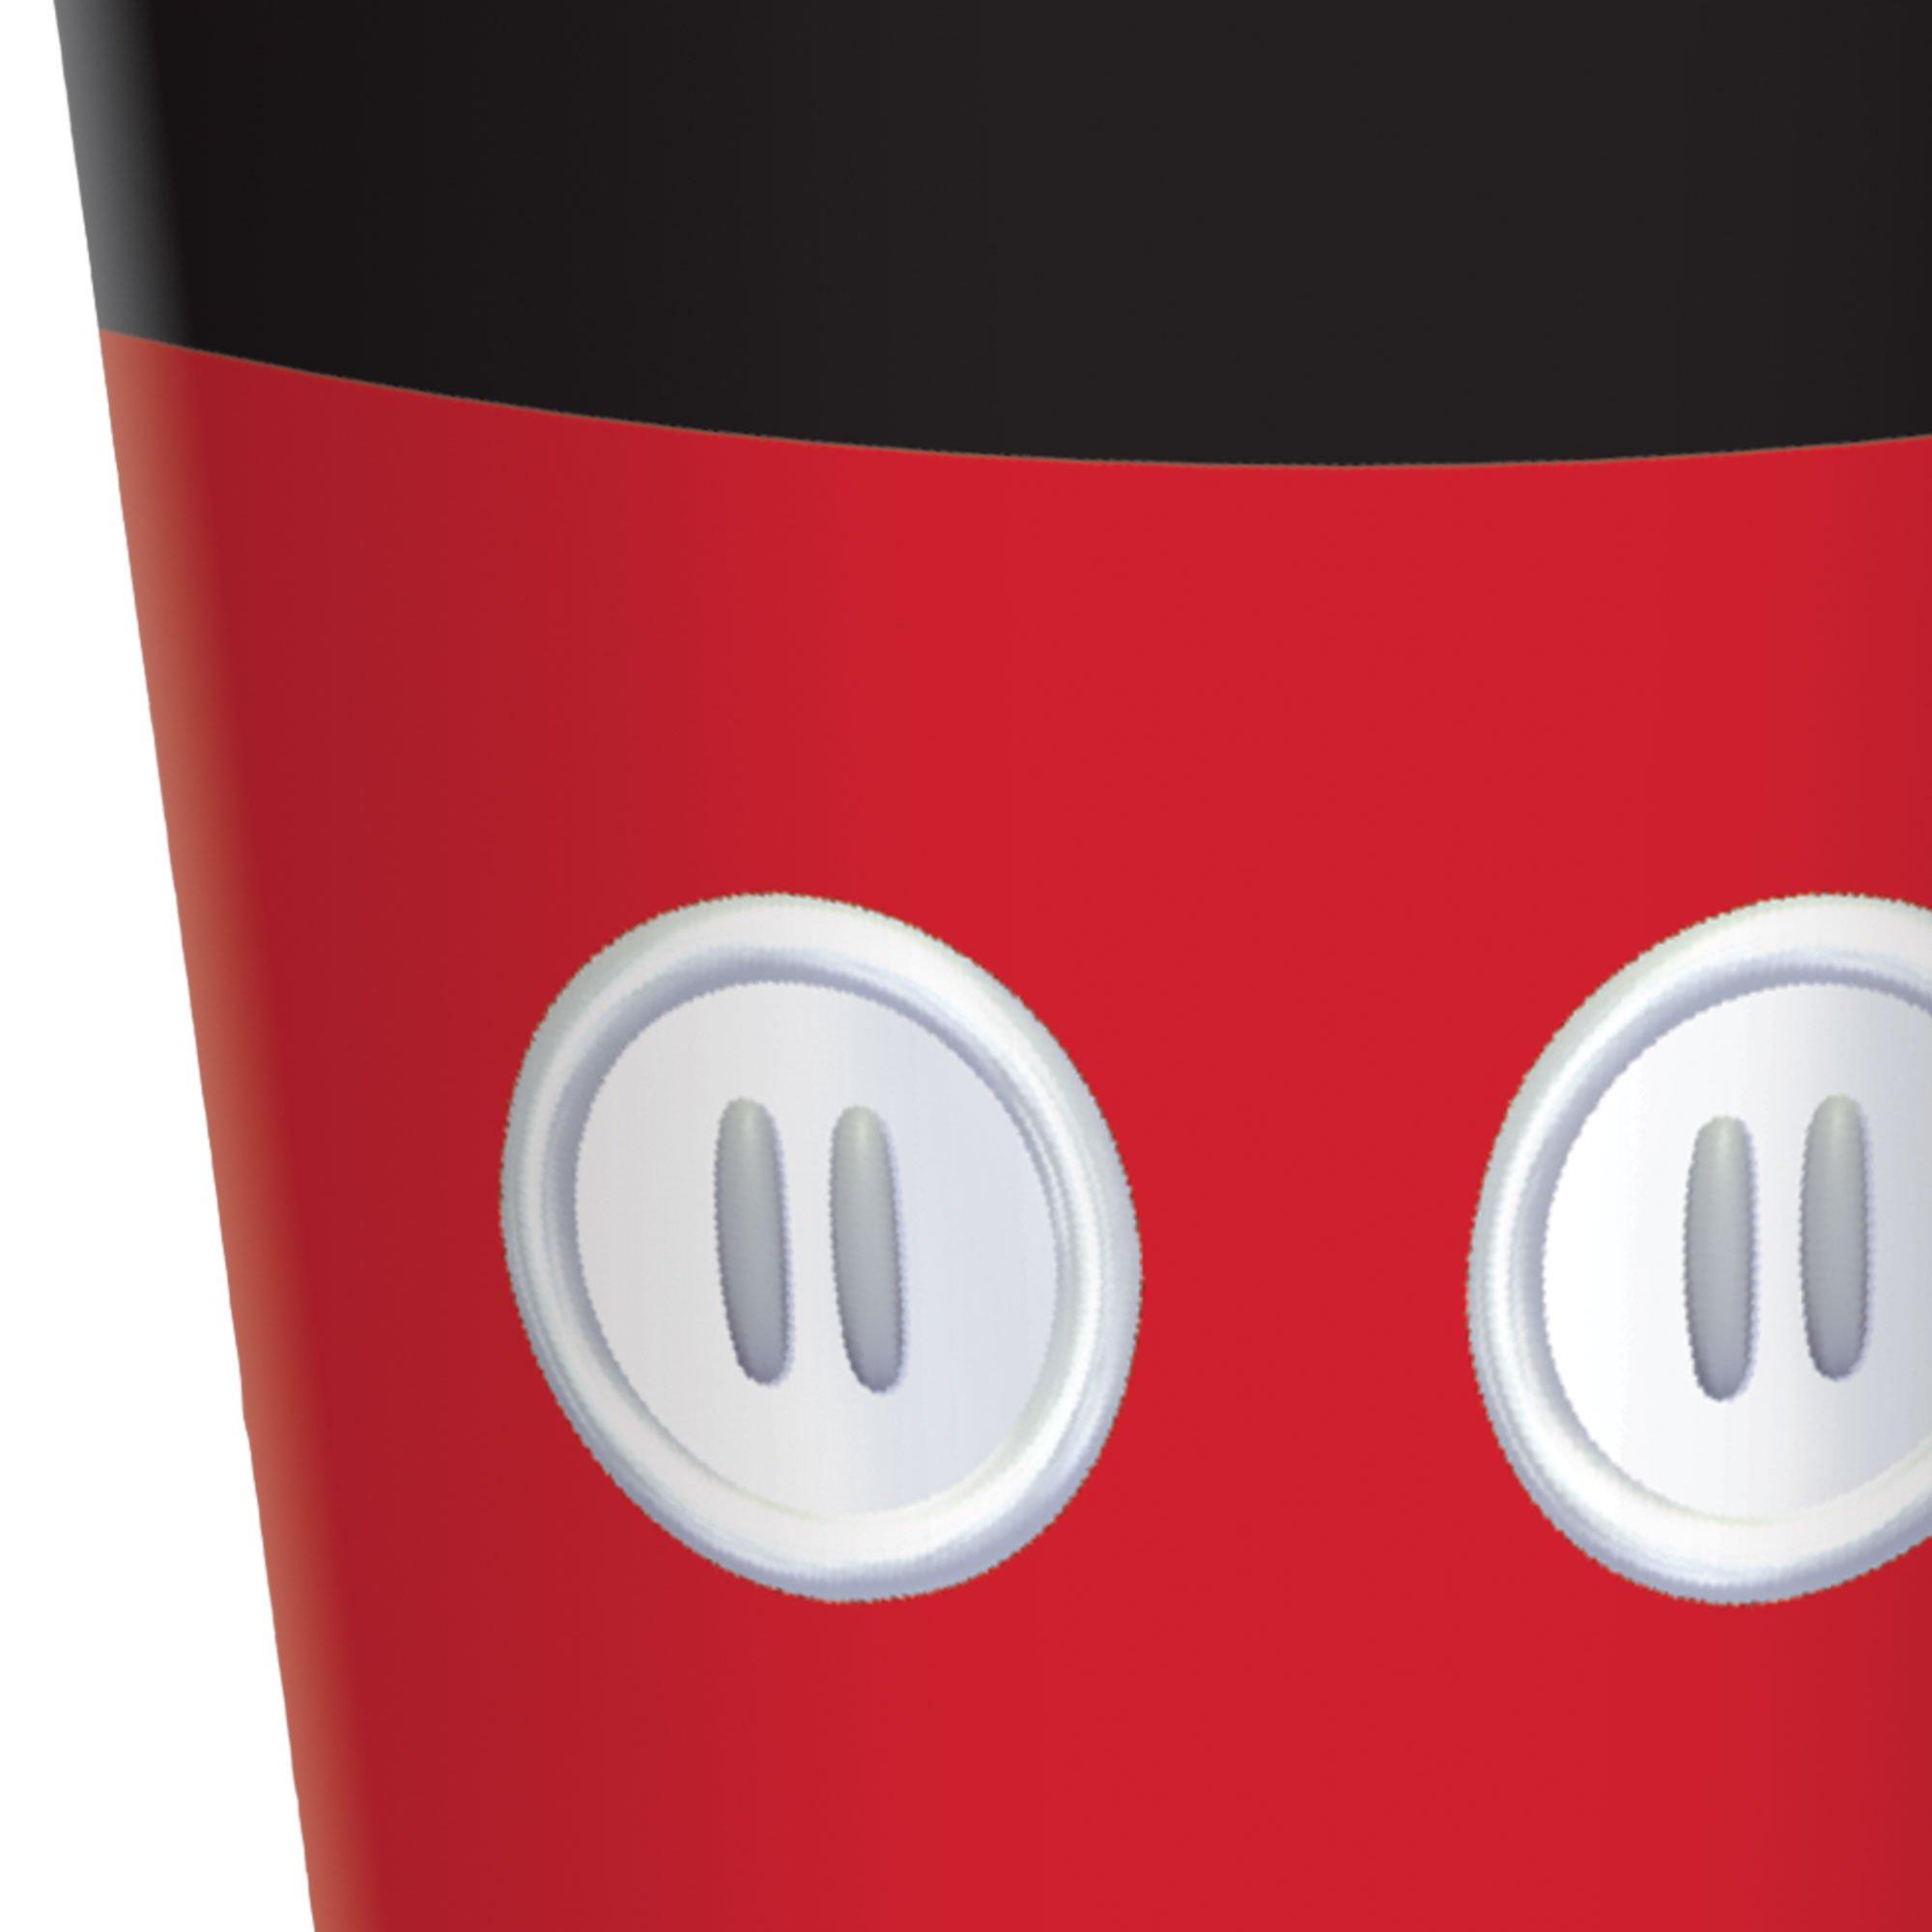 Mickey Mouse Forever Cups 8ct